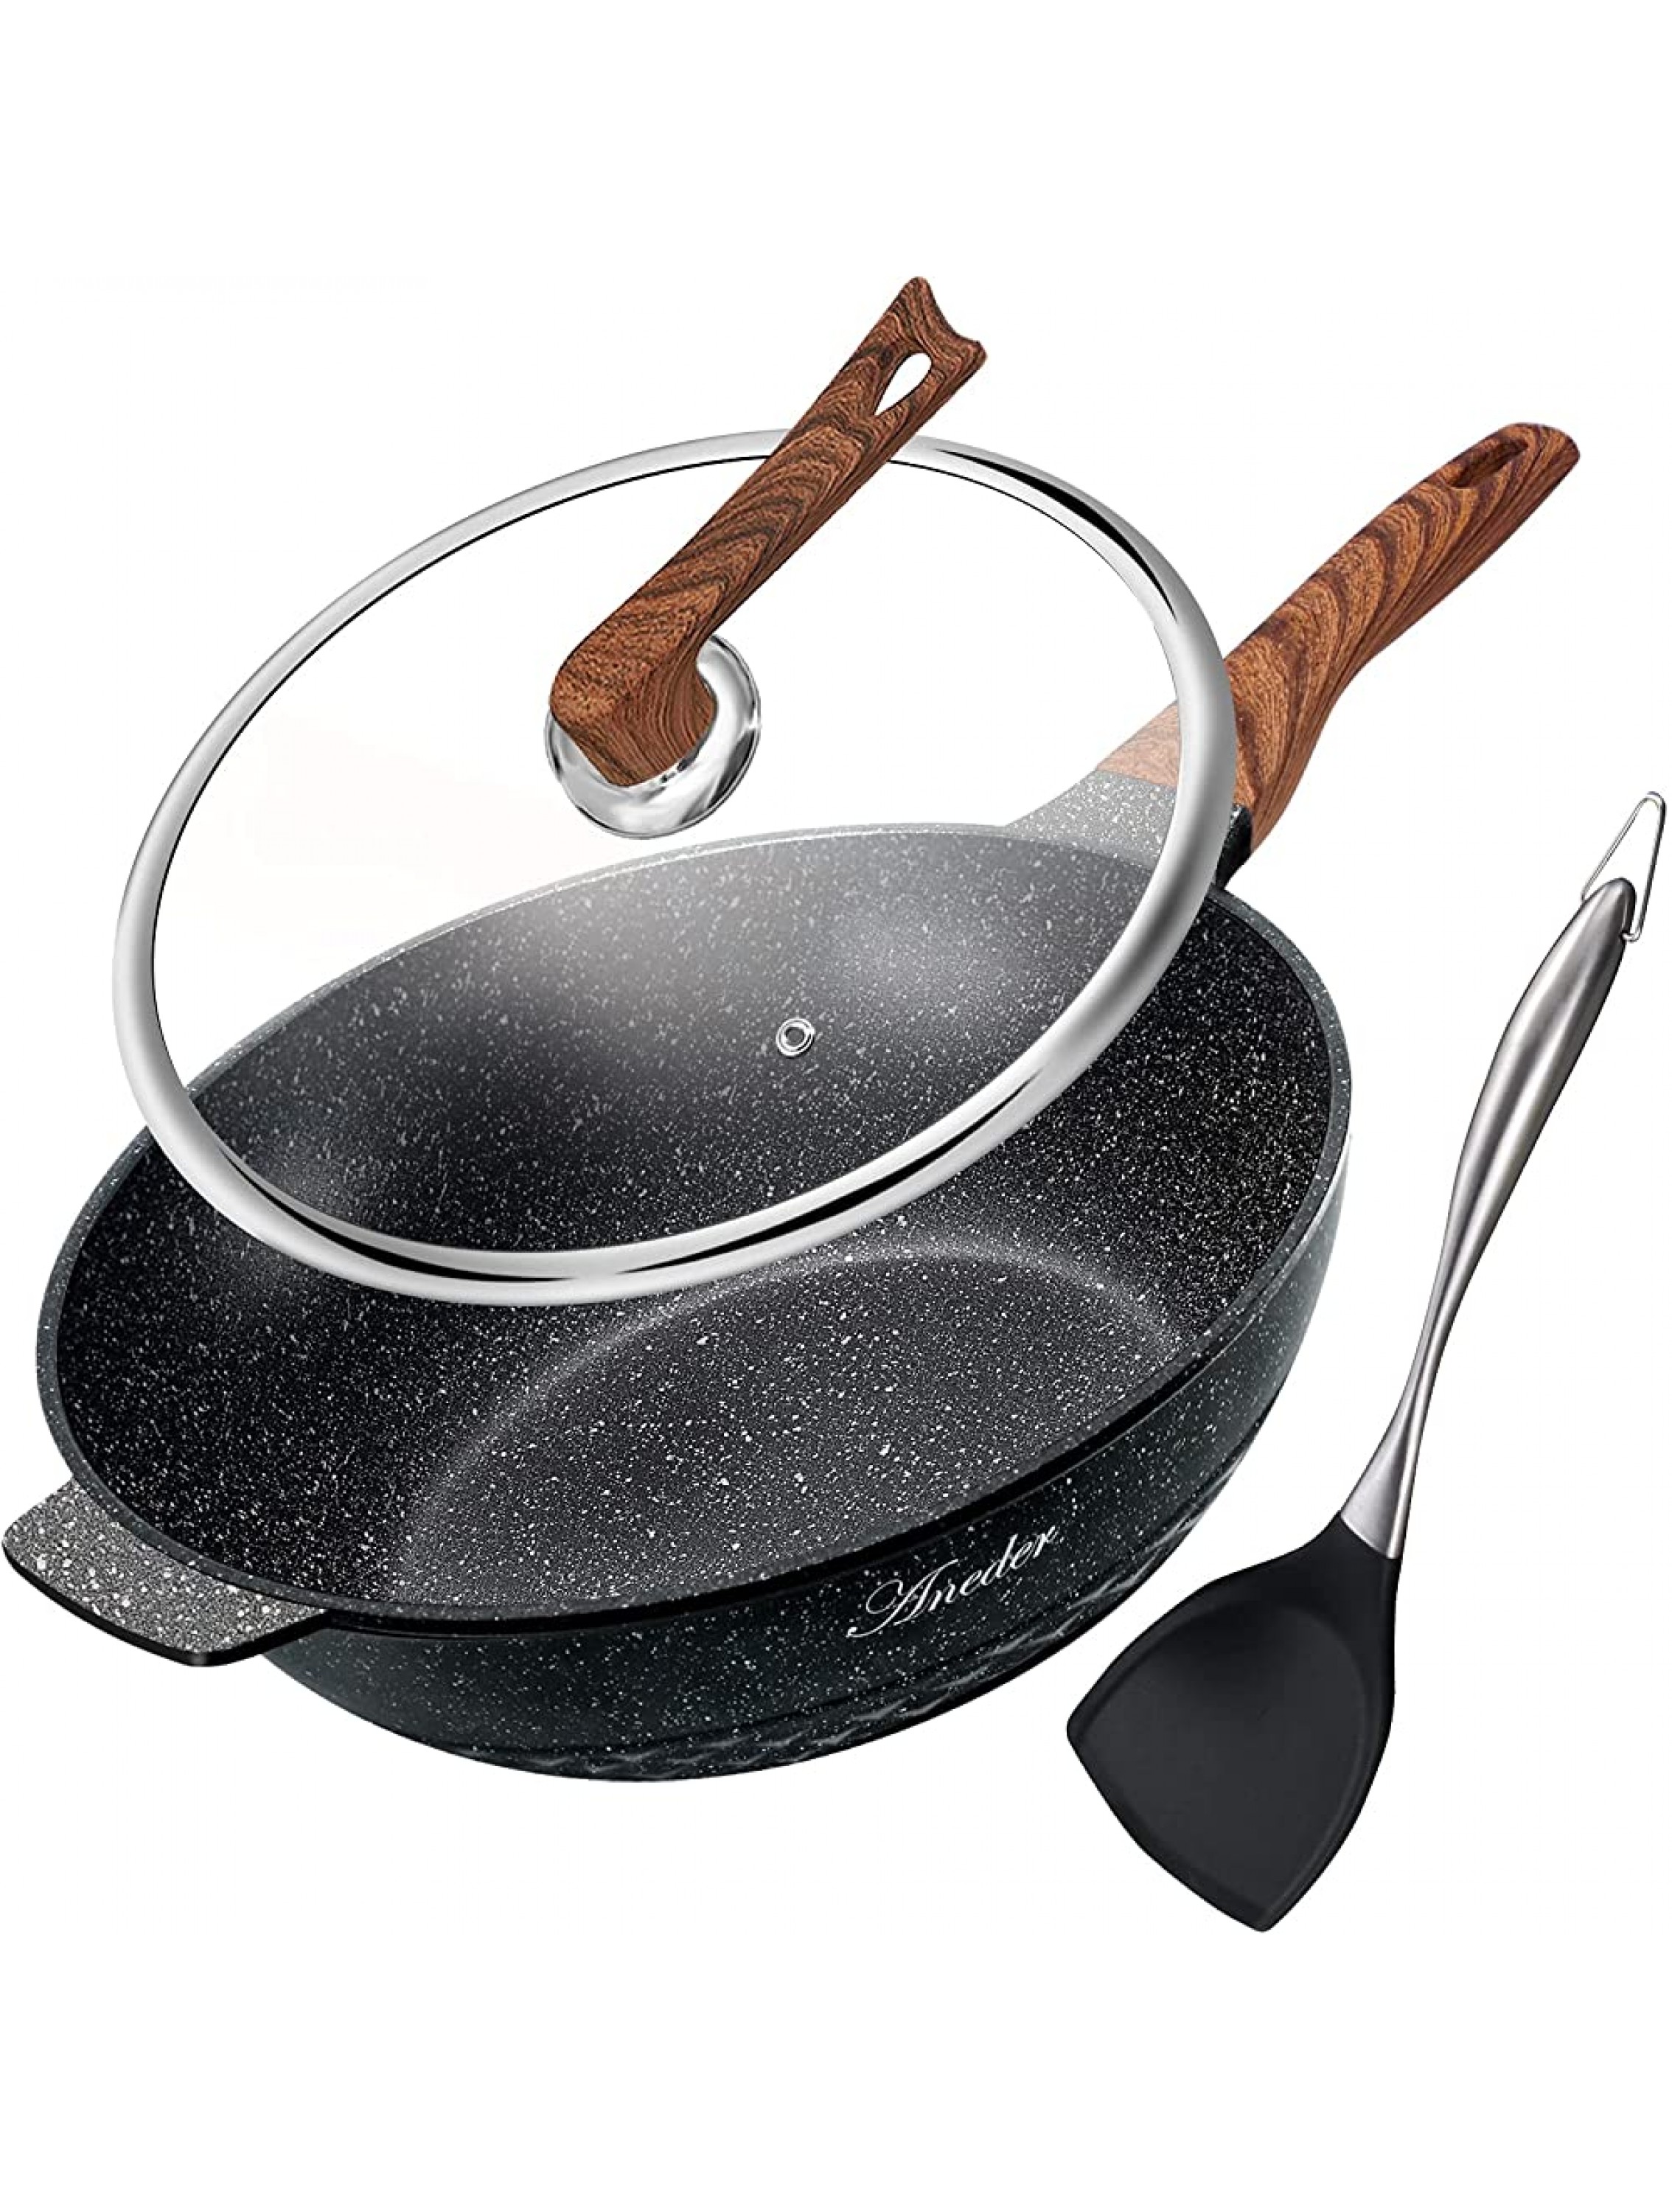 Wok Pan Nonstick 12.5 Inch Skillet Aneder Frying Pan with Lid & Spatula Wok Pans for Cooking Electric Induction & Gas Stoves Oven Safe - BGMWY3Y9K